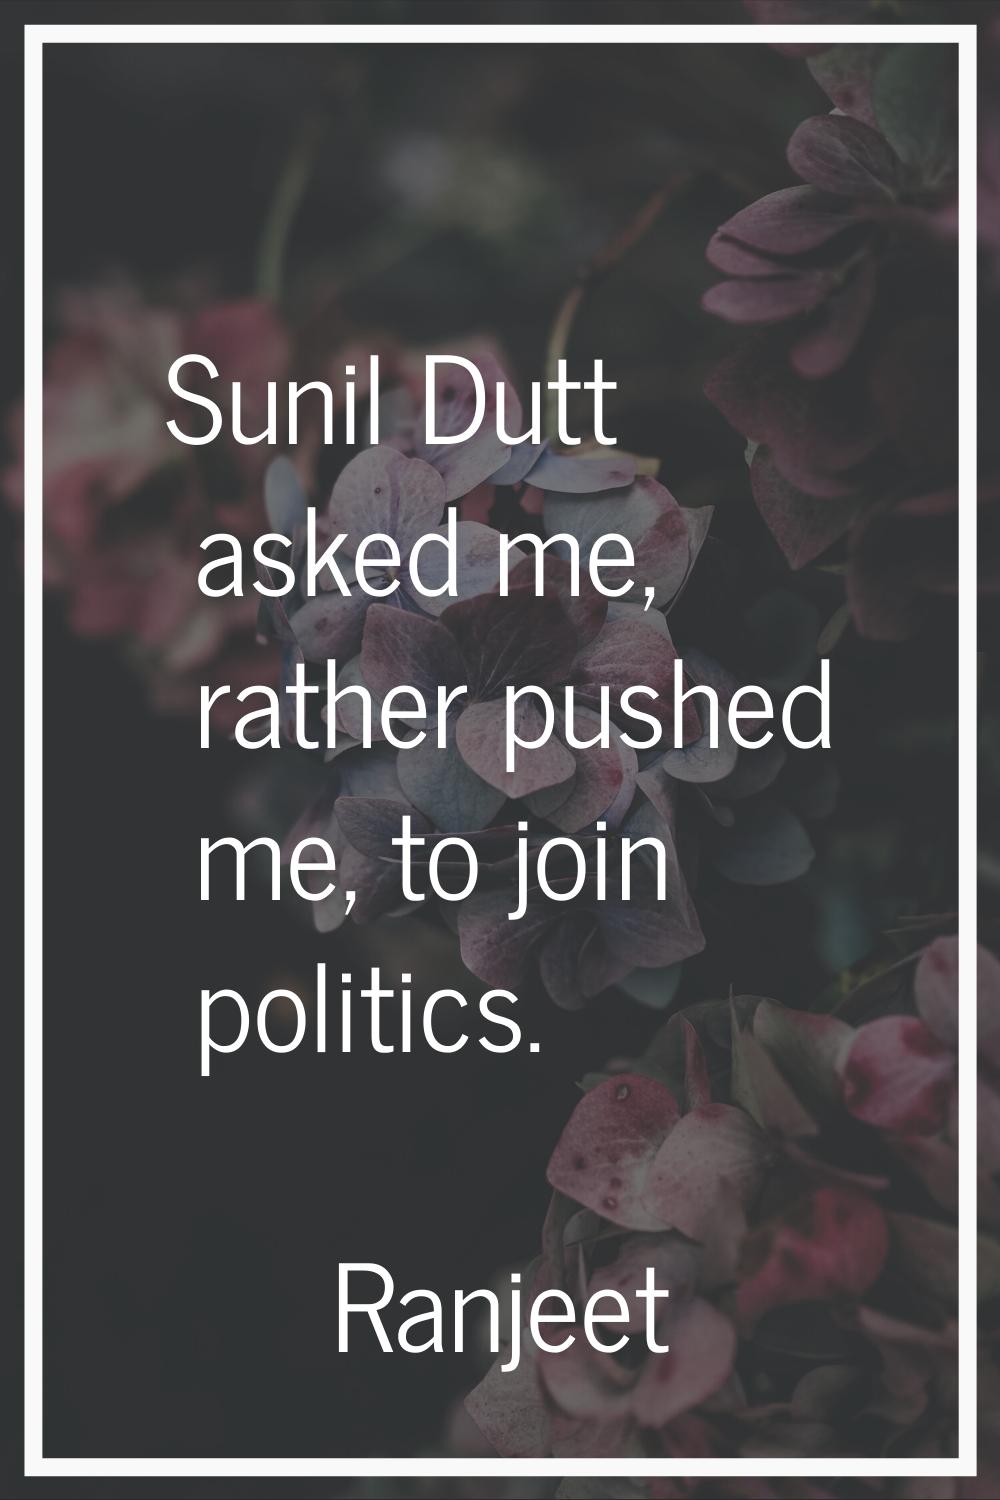 Sunil Dutt asked me, rather pushed me, to join politics.